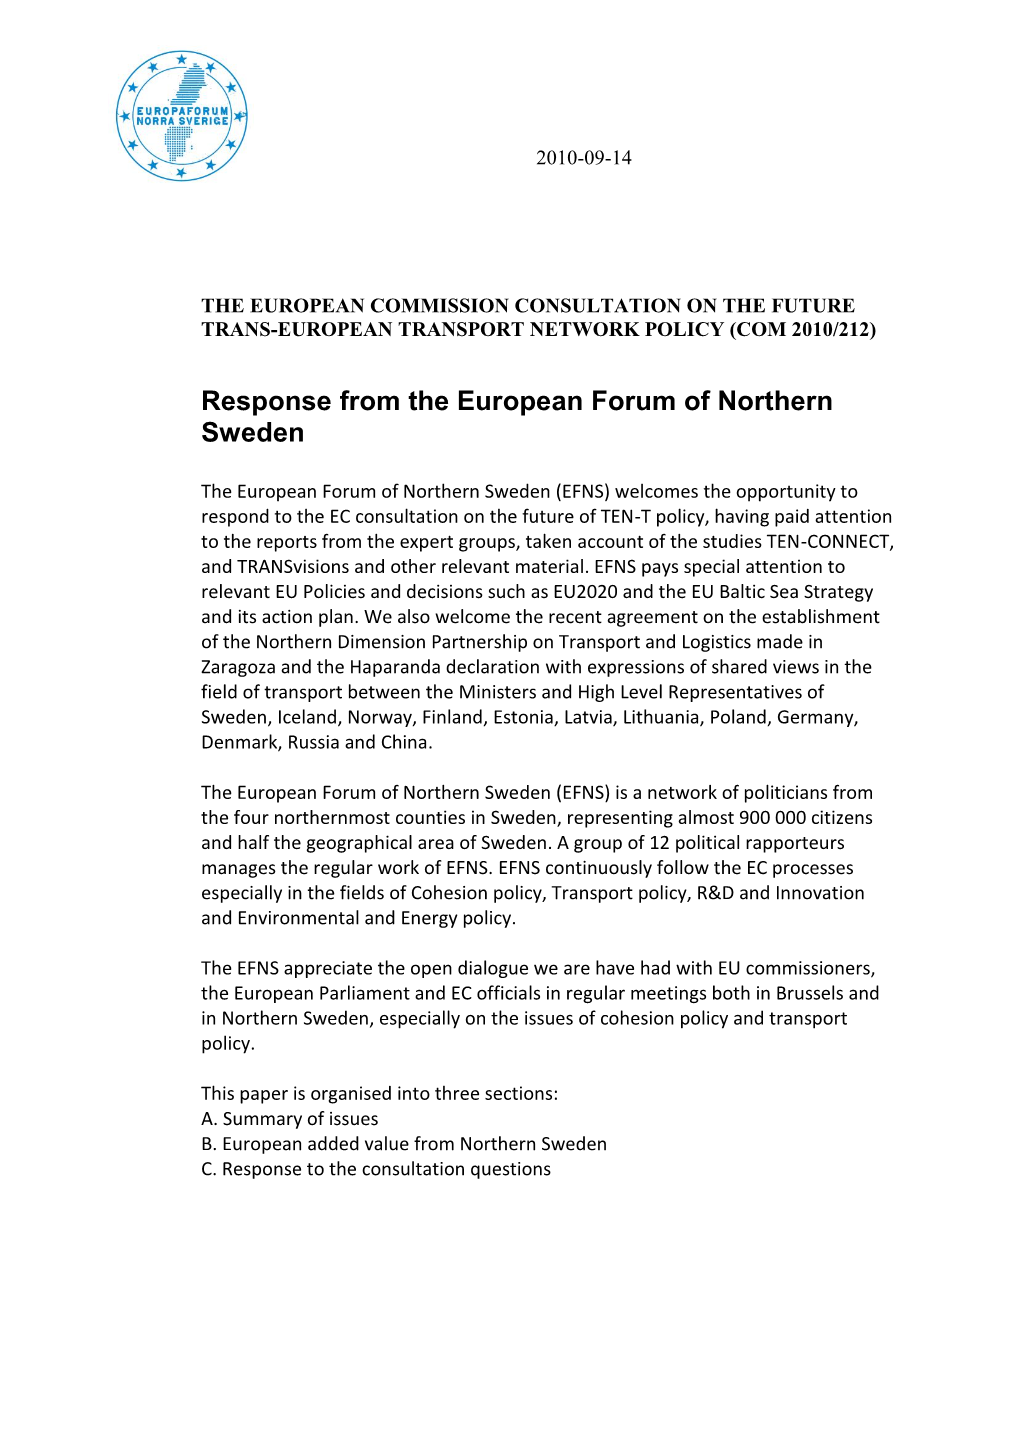 Response from the European Forum of Northern Sweden